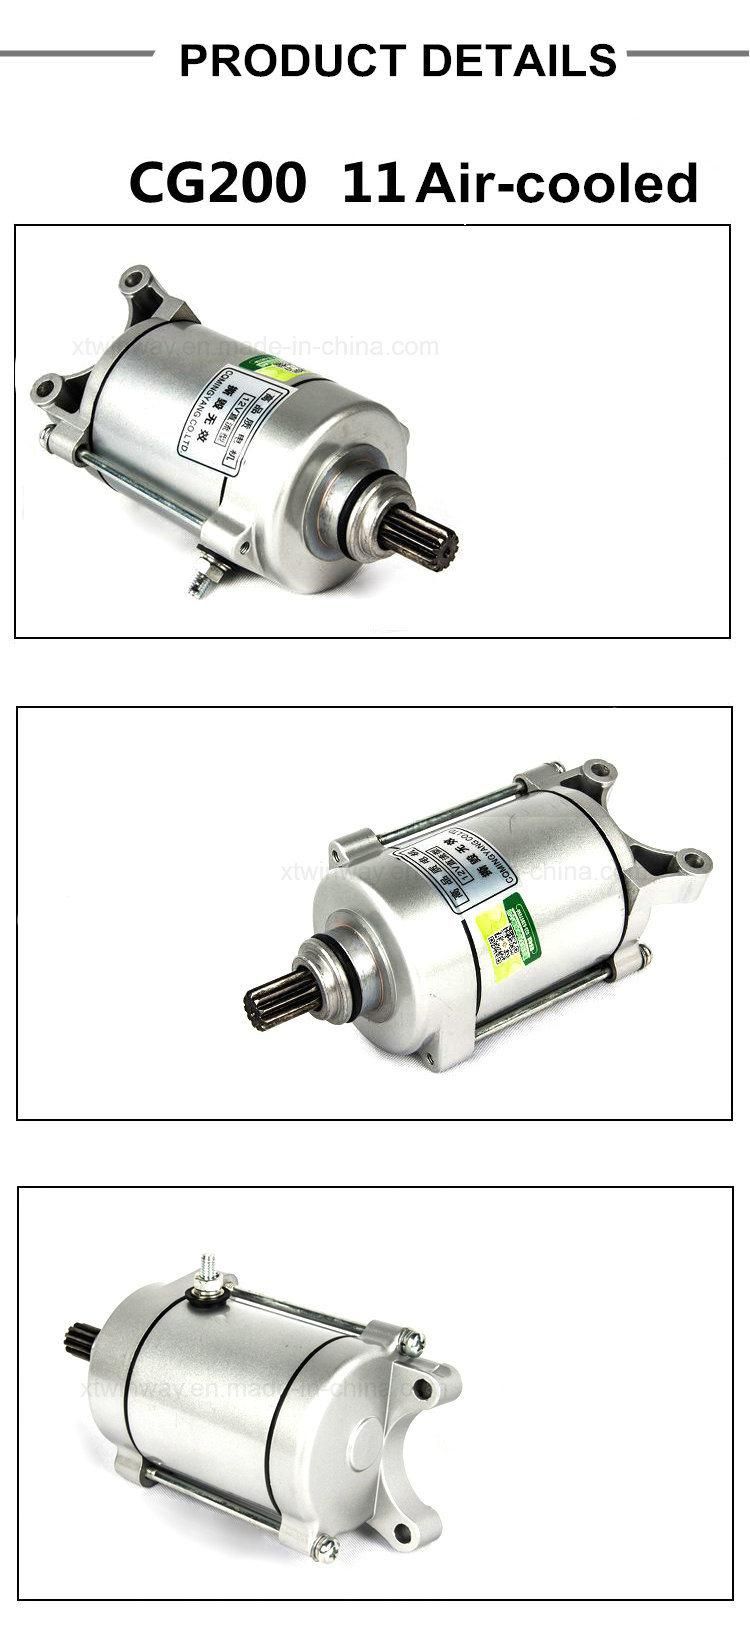 Ww-8839 12V Motorcycle Parts Starter Motor for Cg200 11t